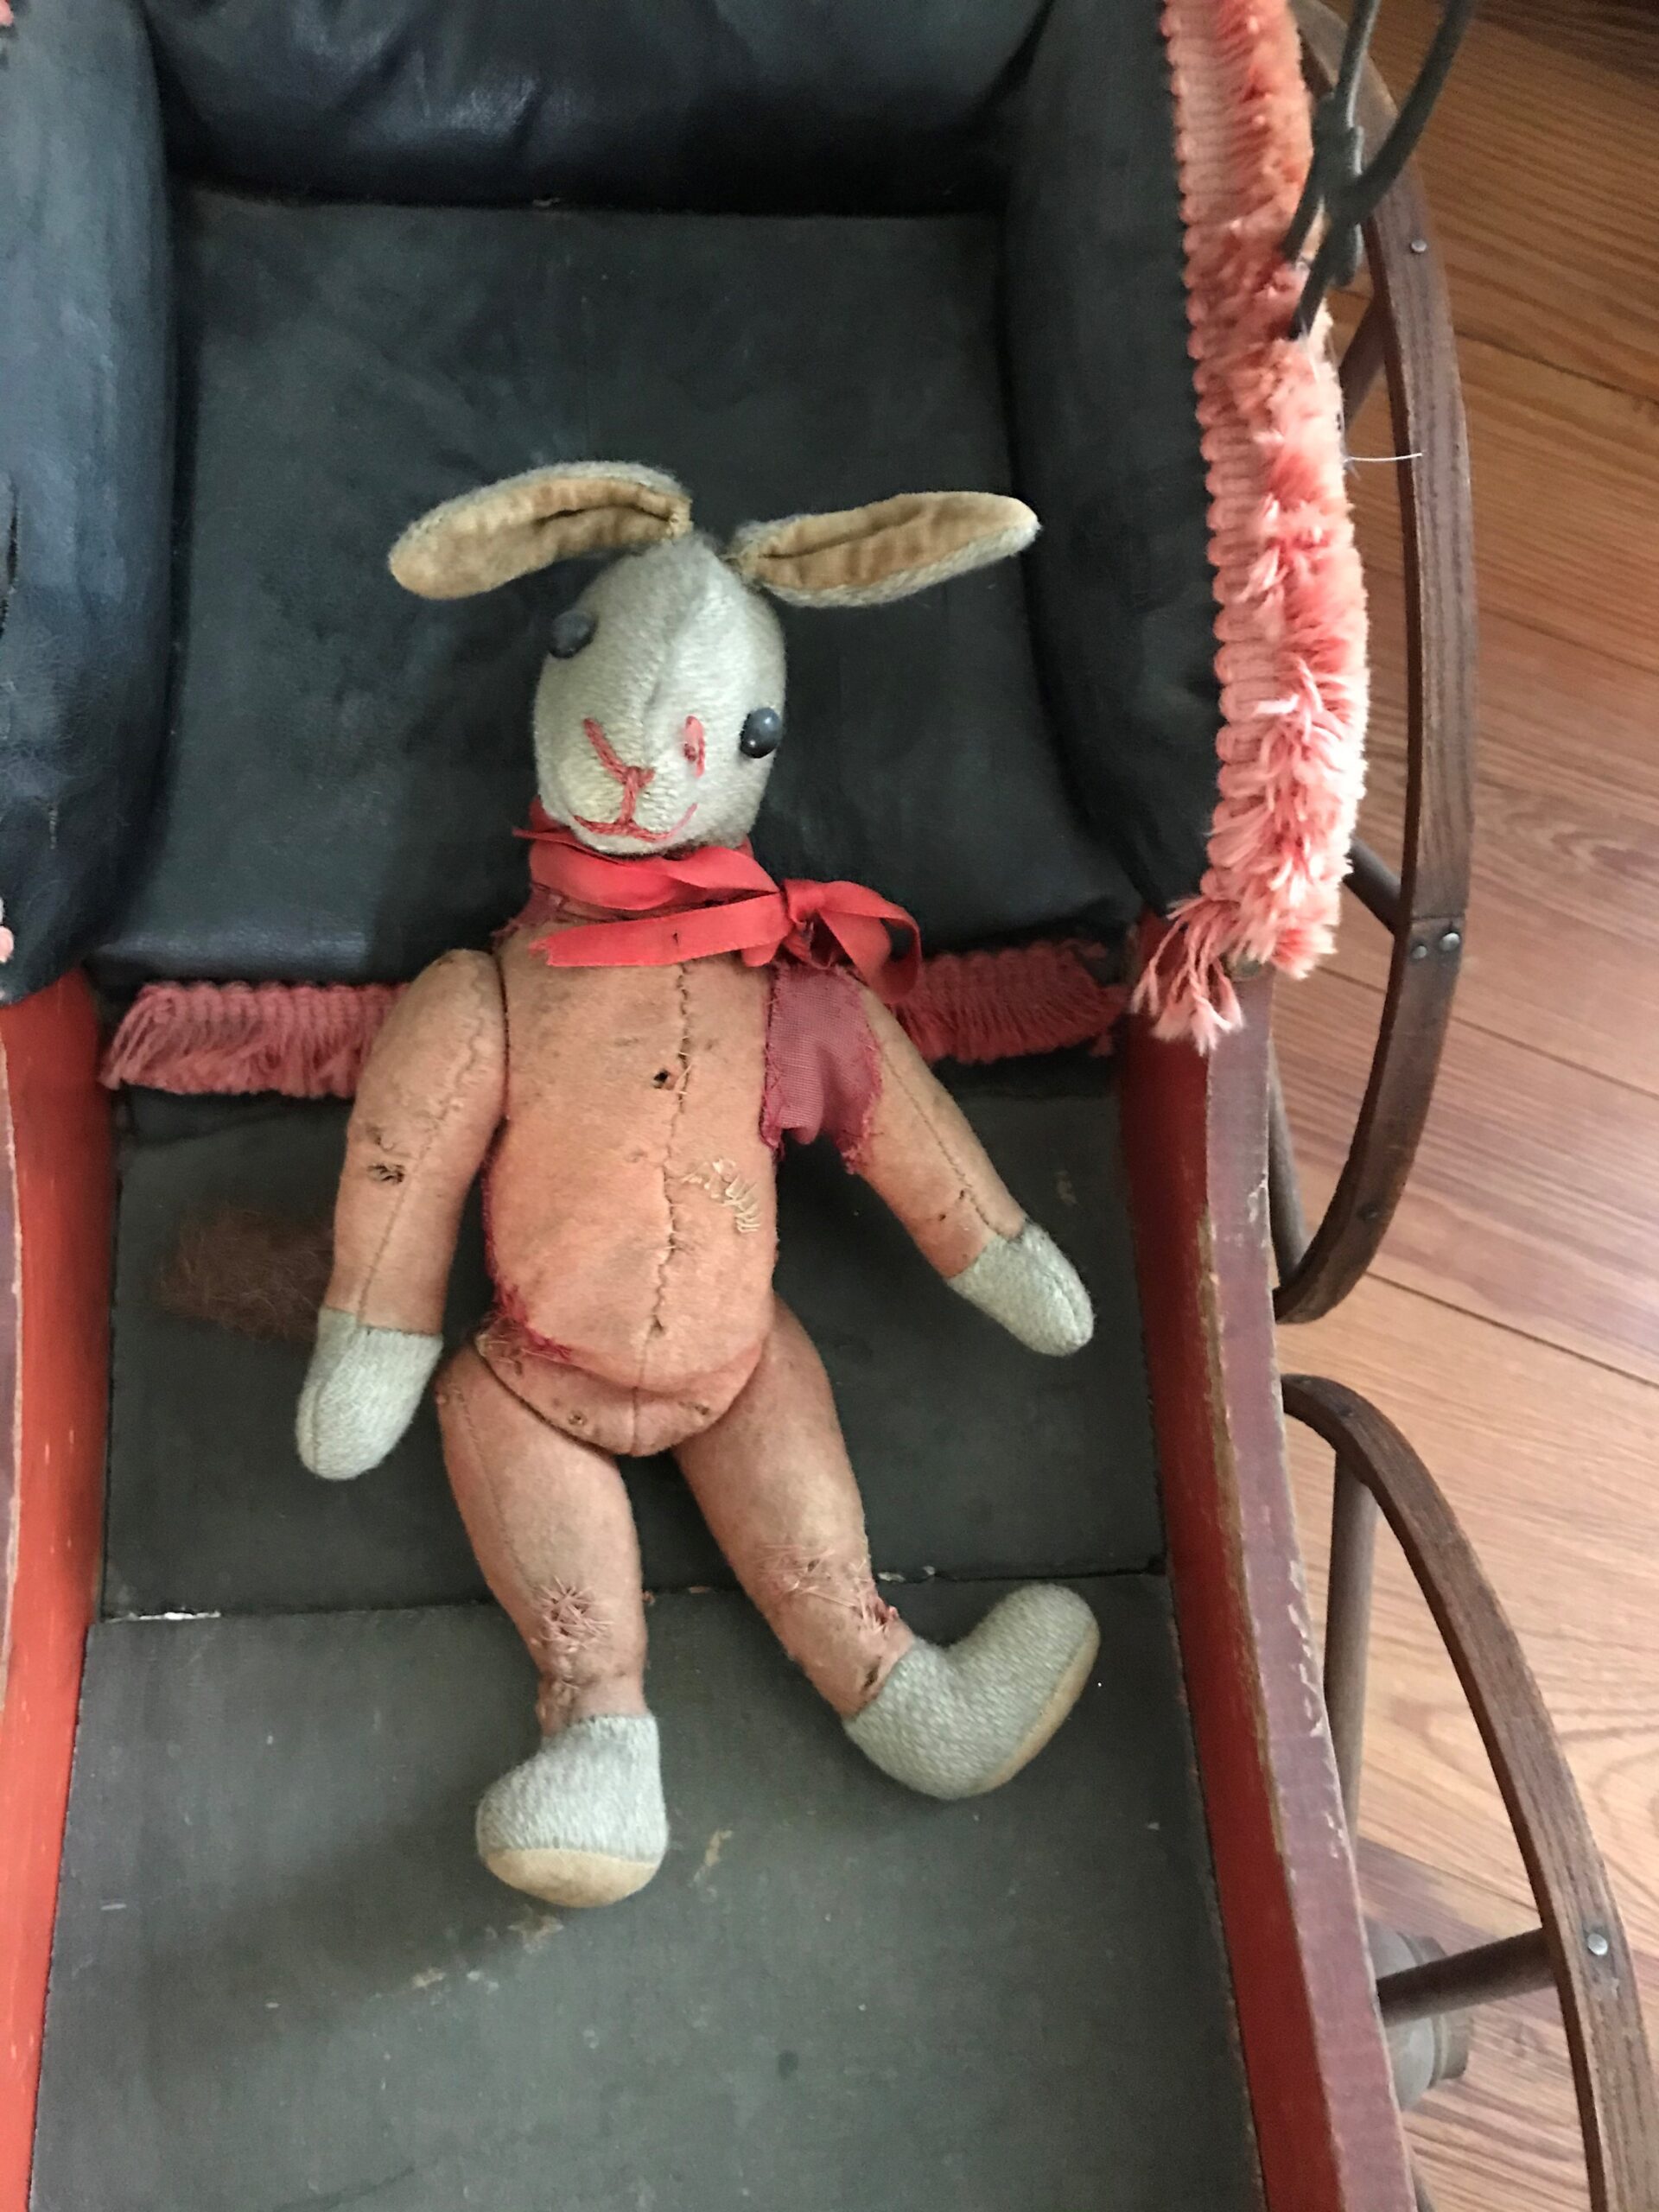 An old slightly tattered stuffed rabbit toy rests inside of an antique stroller. The rabbit has a red ribbon tied in a bow around the neck.